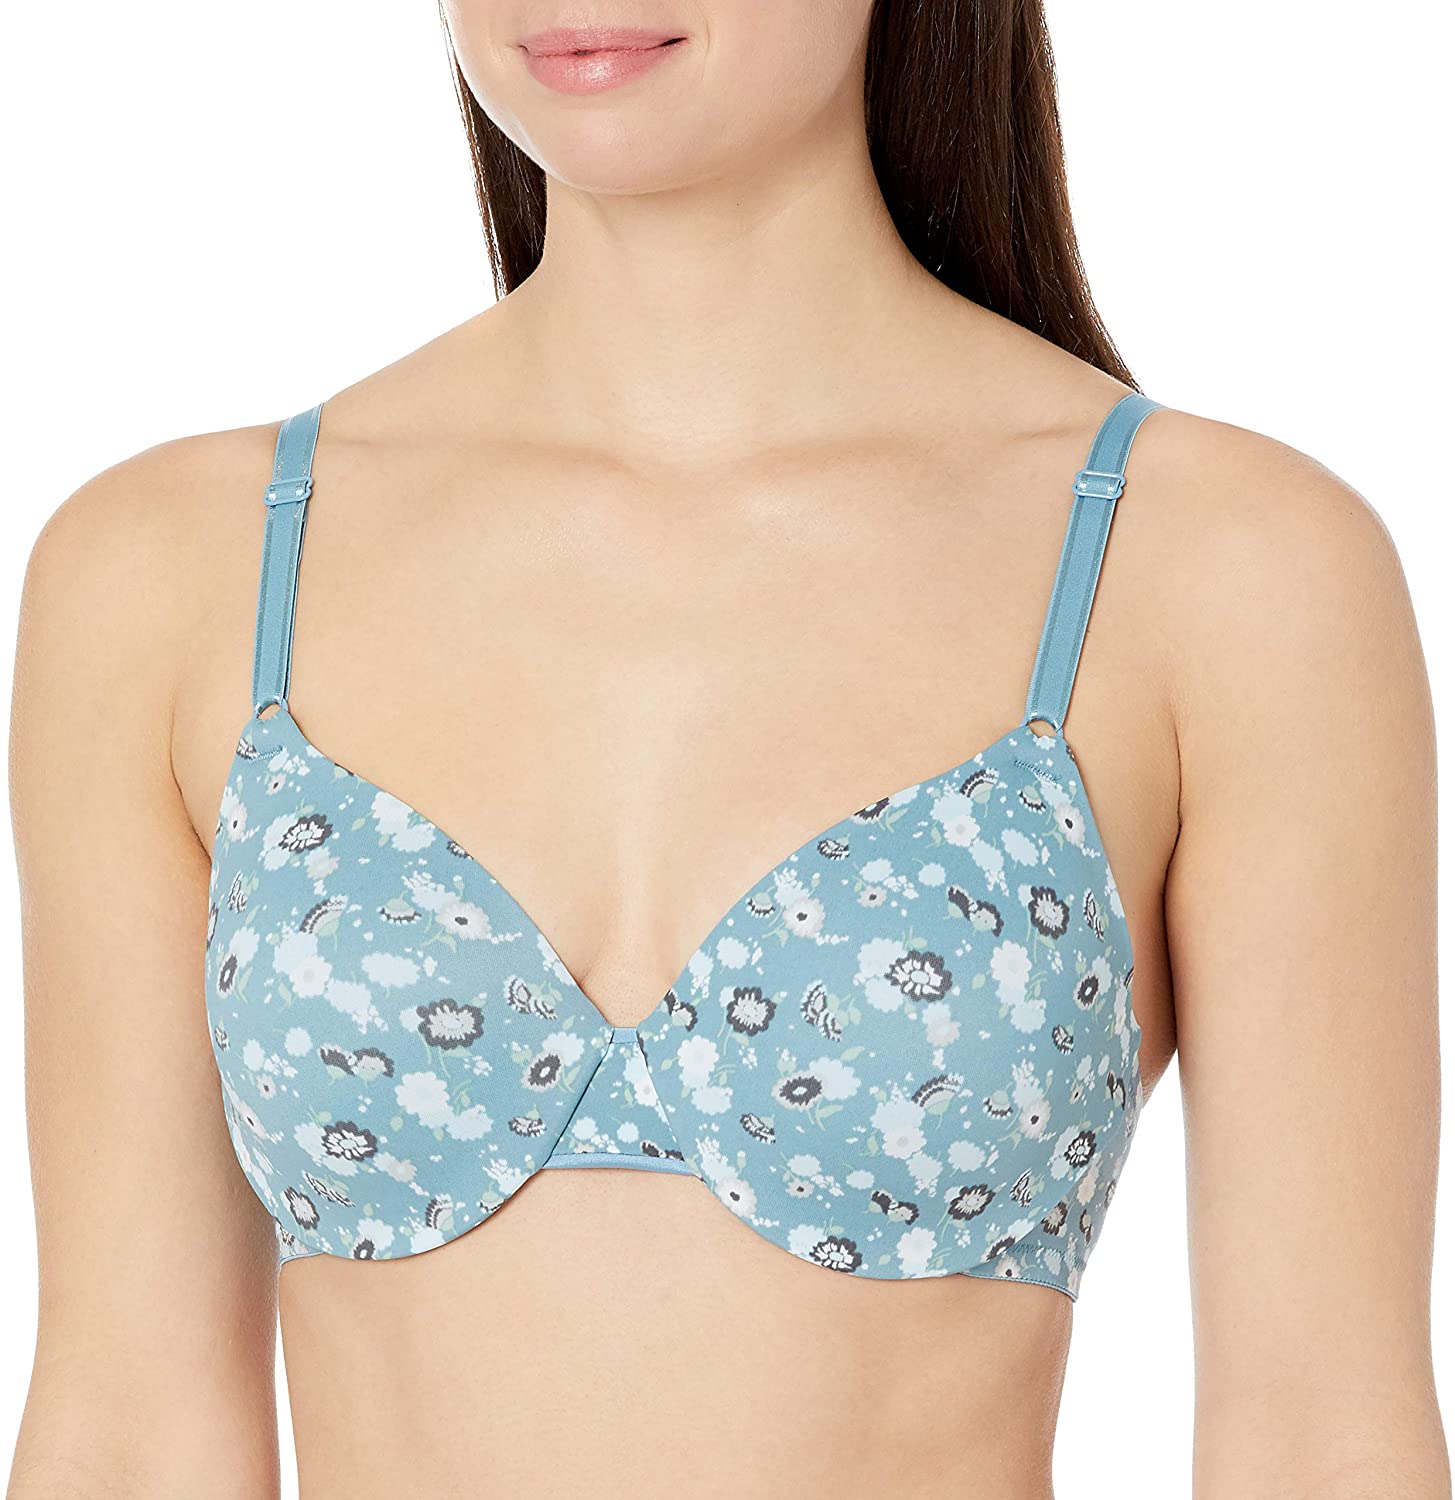 Best Comfortable Bra for Sagging Breasts